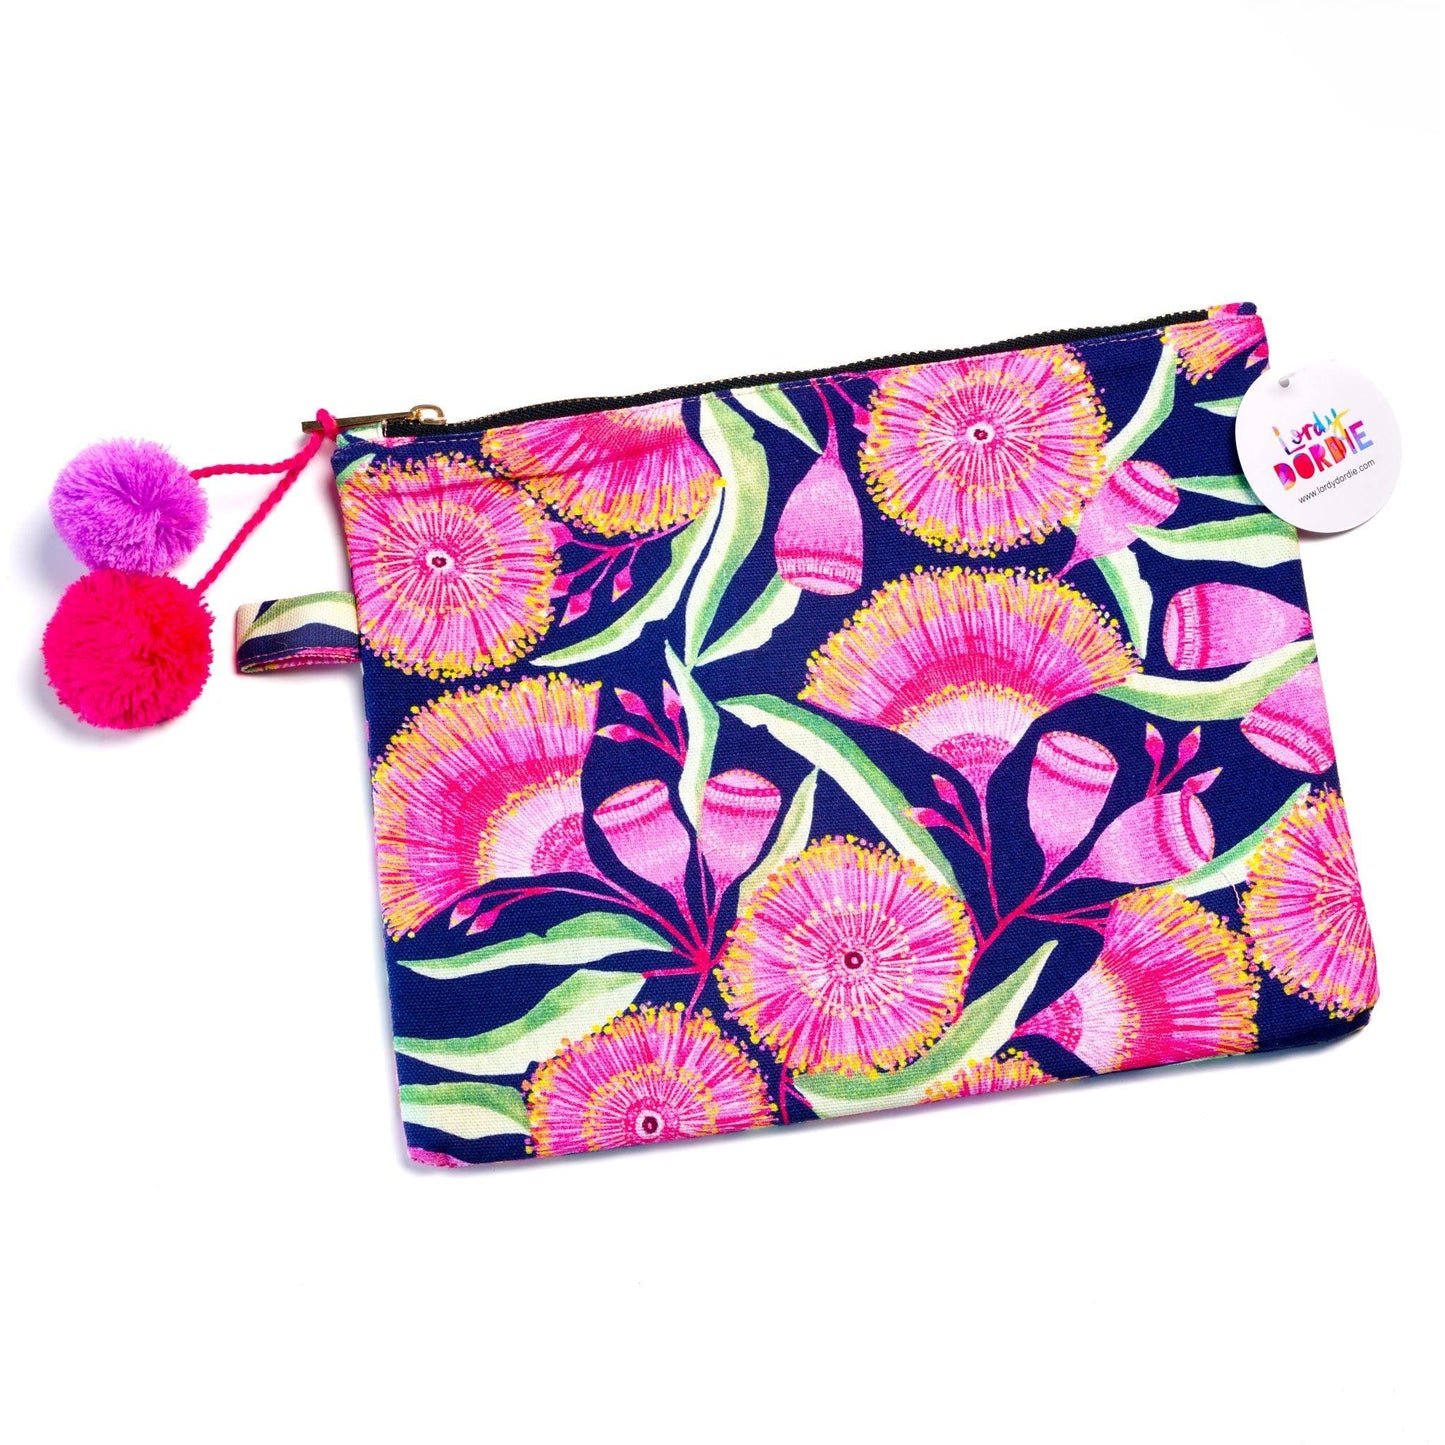 Load image into Gallery viewer, Art Clutch Bag - Gum Blossoms Navy - Lordy Dordie Art
